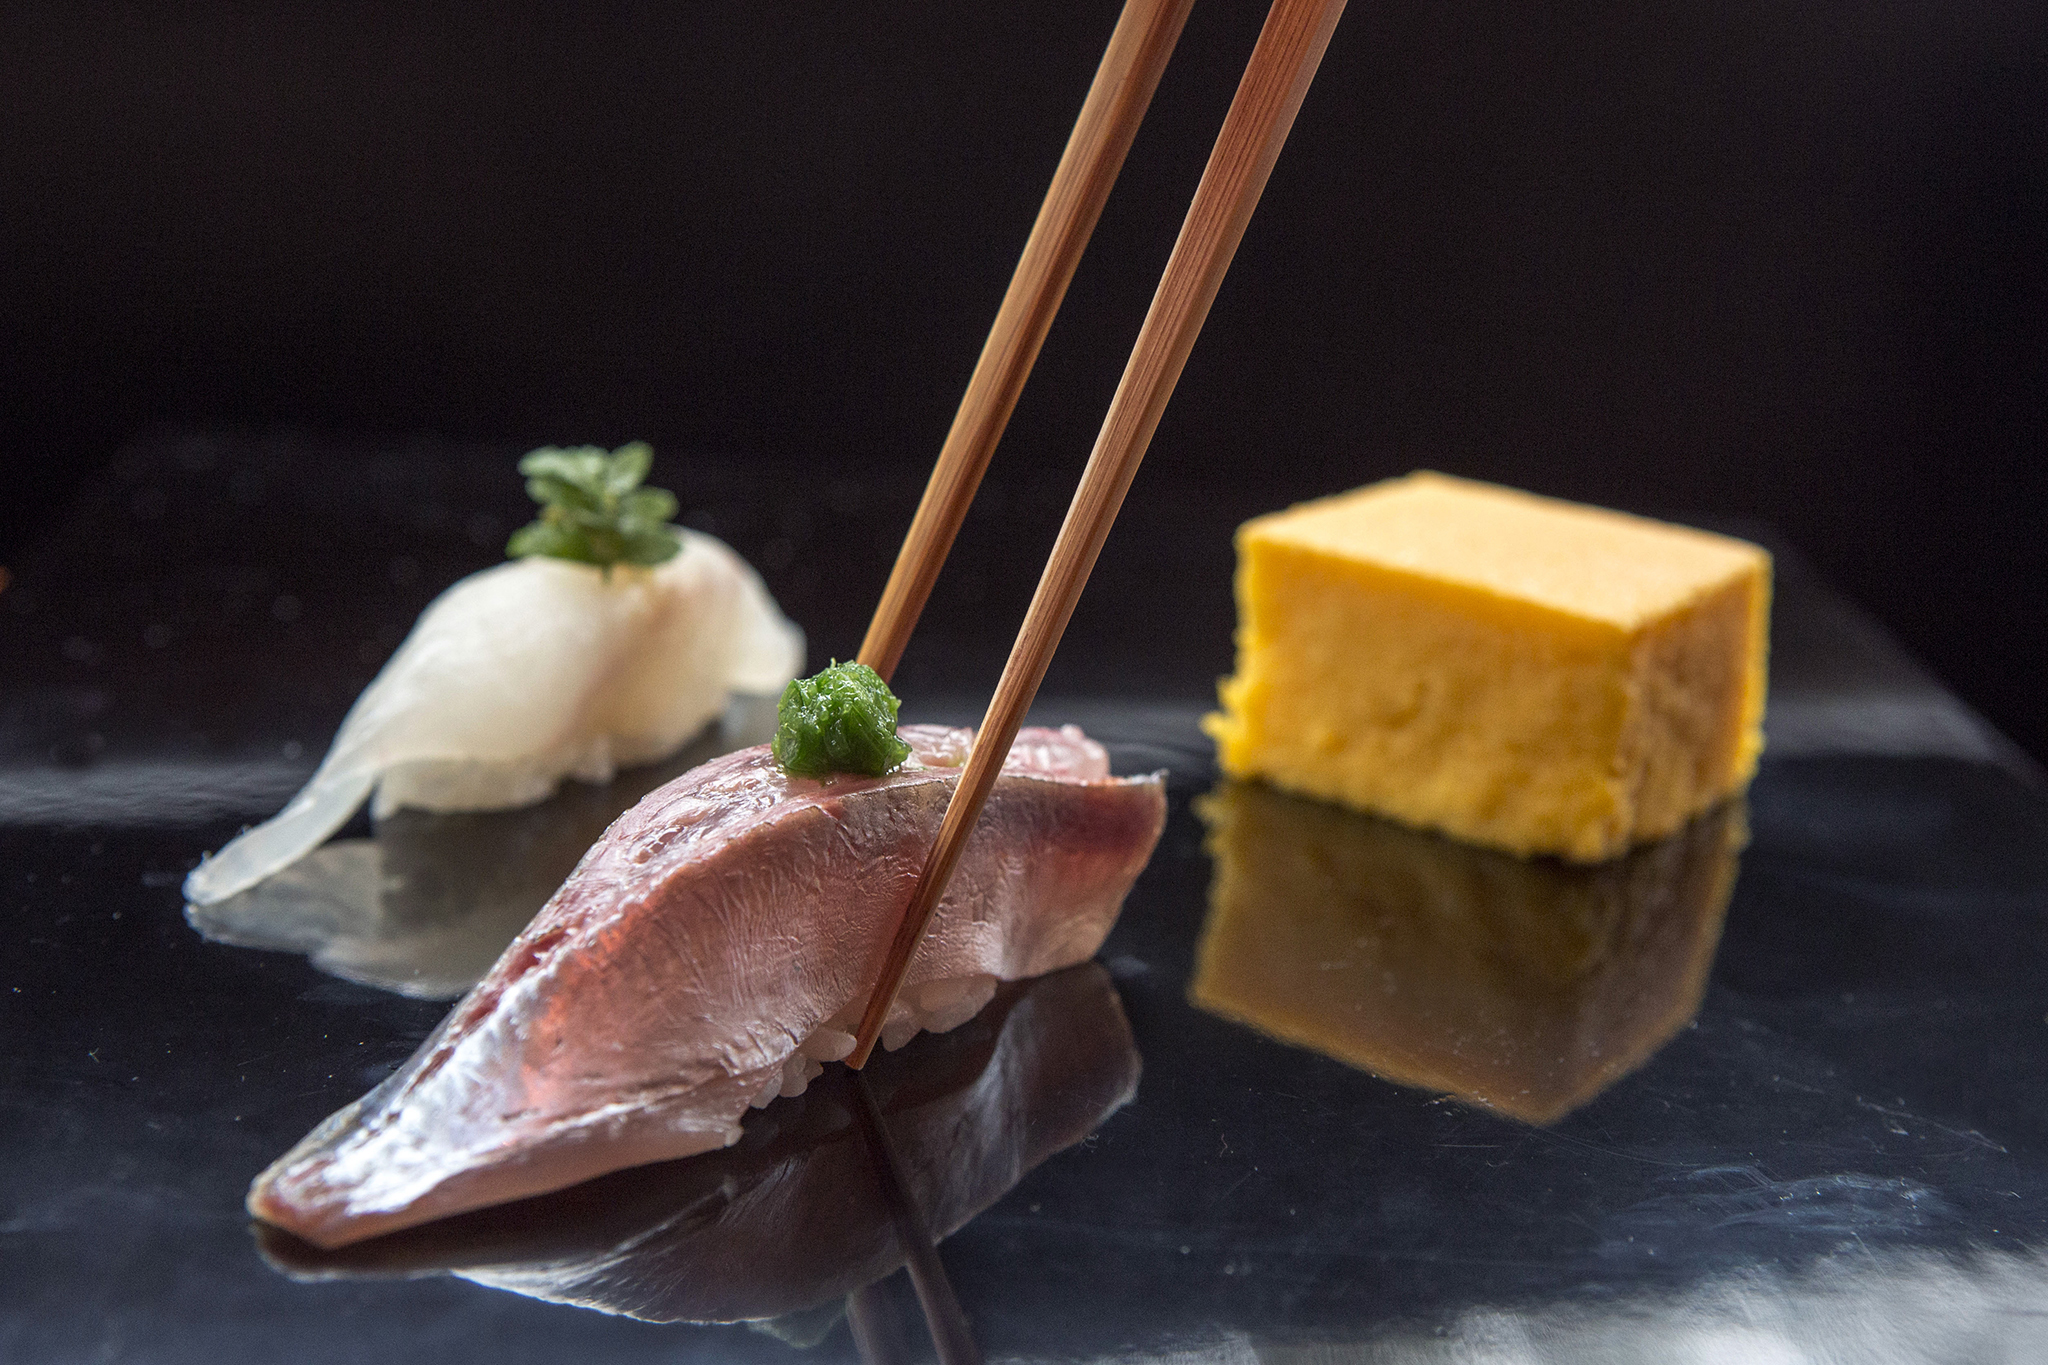 foodies delight kanoyama restaurants authentic japanese sushi experience in new york